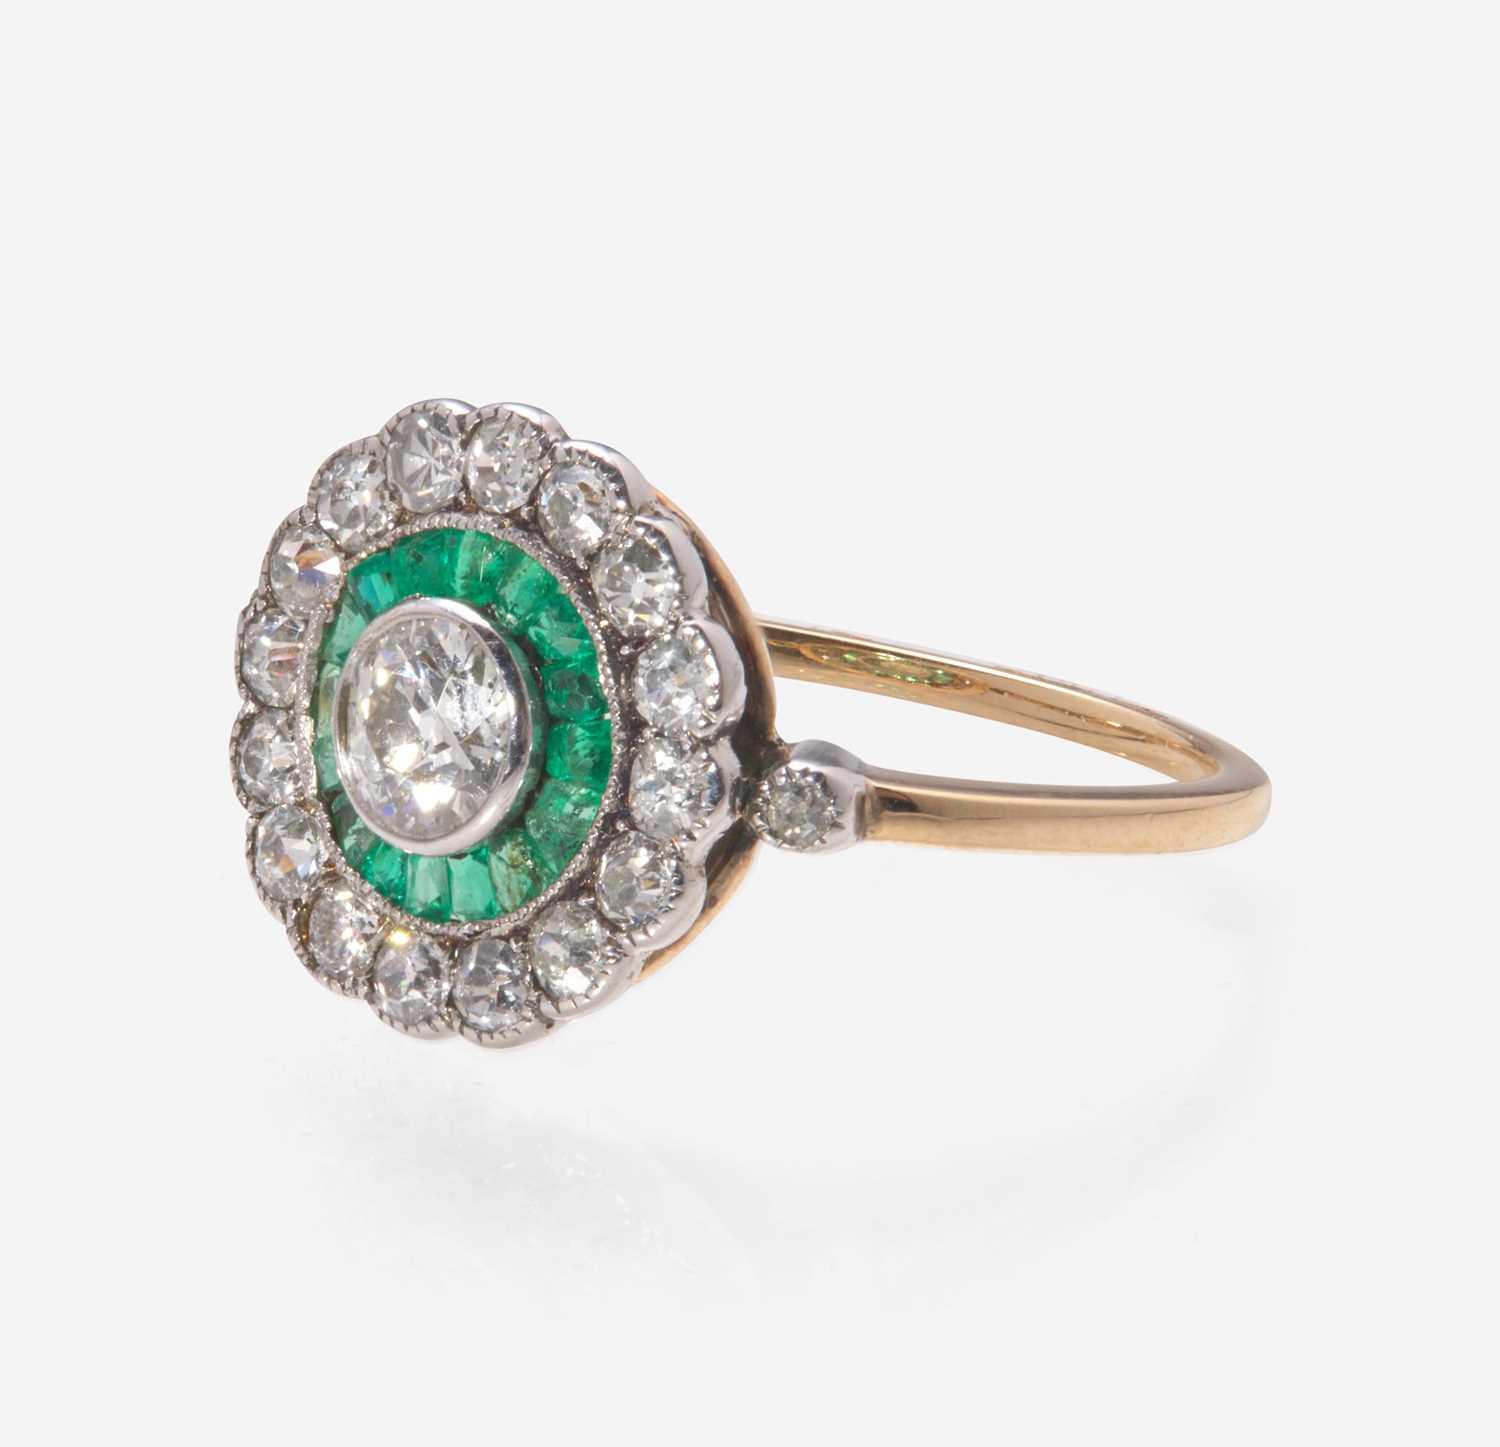 Lot 21 - An Art Deco Gold, Diamond, and Emerald Ring